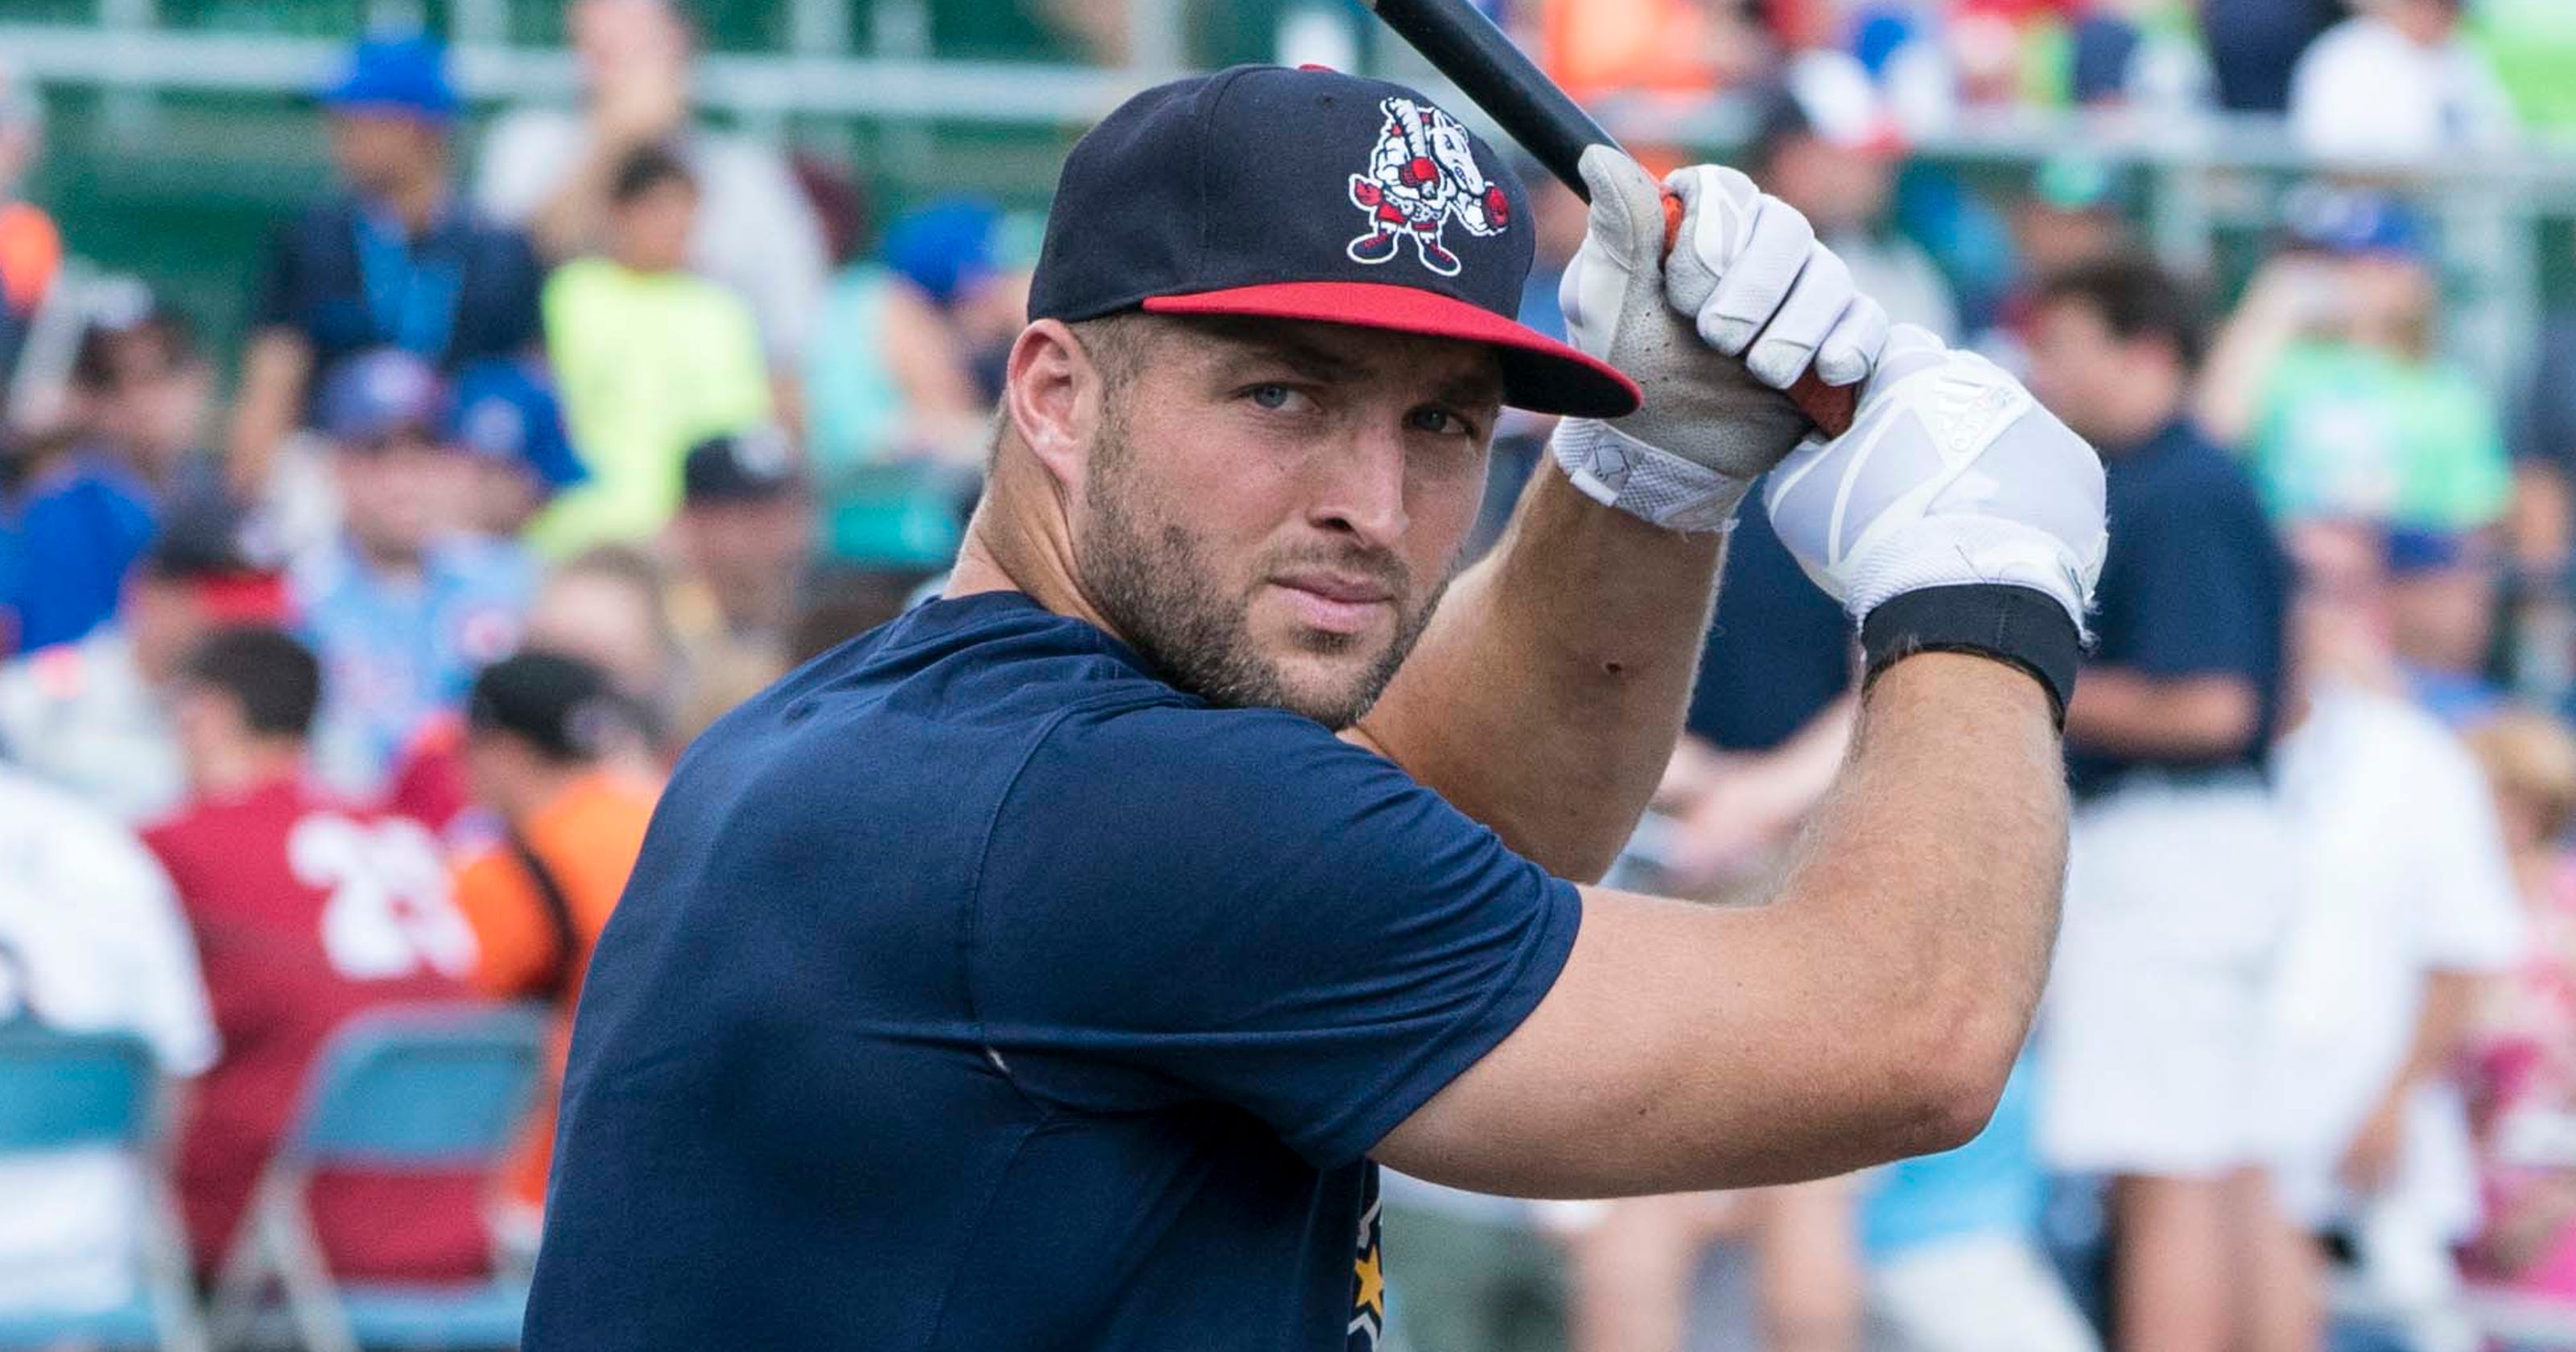 Tim Tebow: Mets GM says player is 'one step away' from major leagues